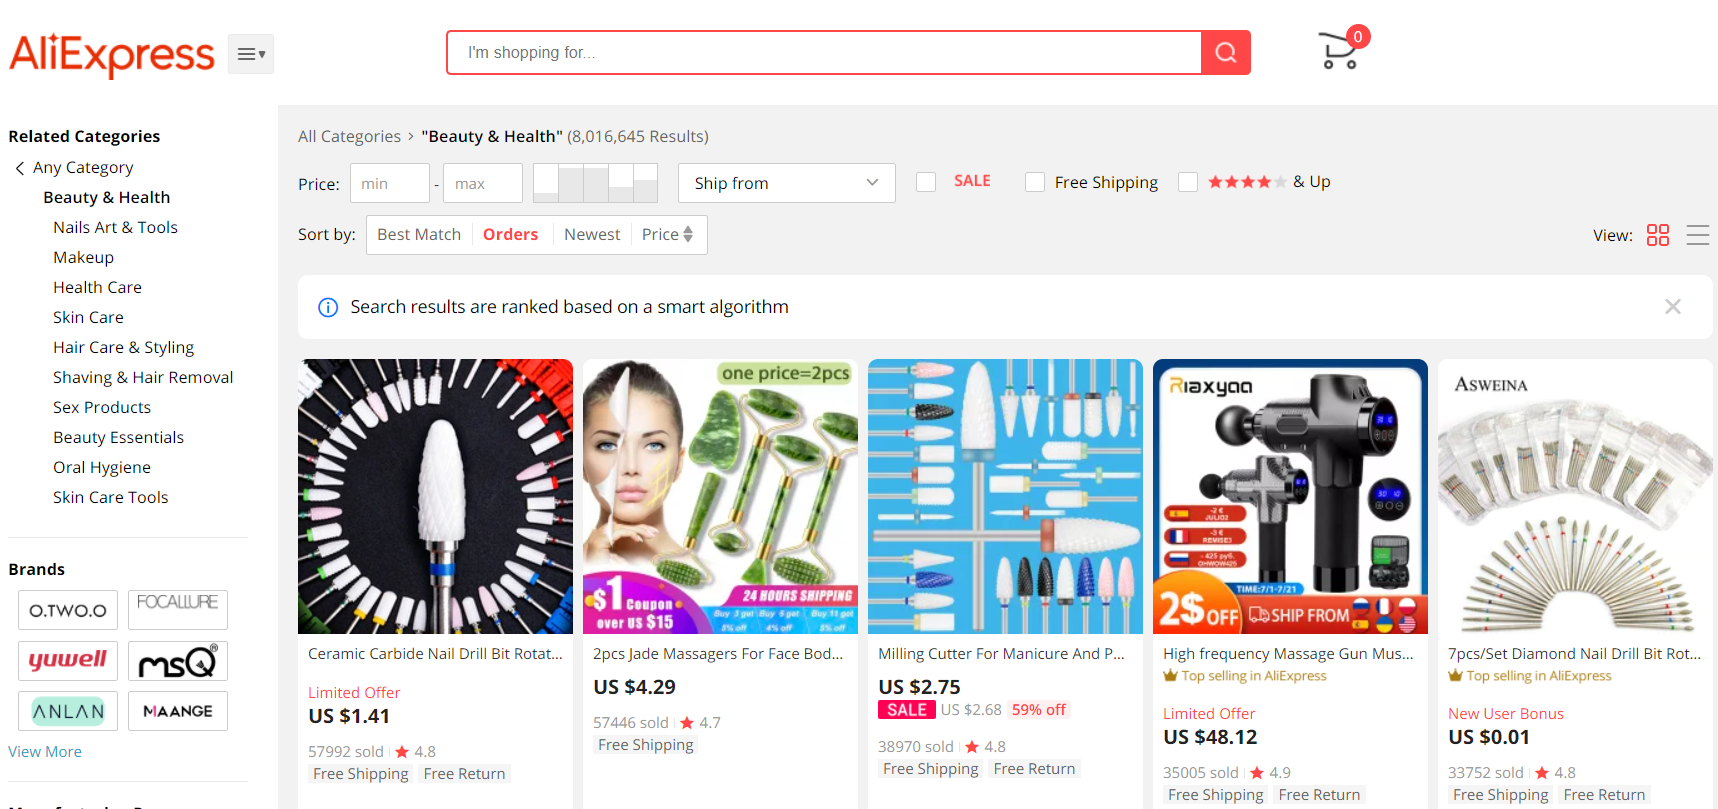 Top selling products in the beauty & health category on Aliexpress